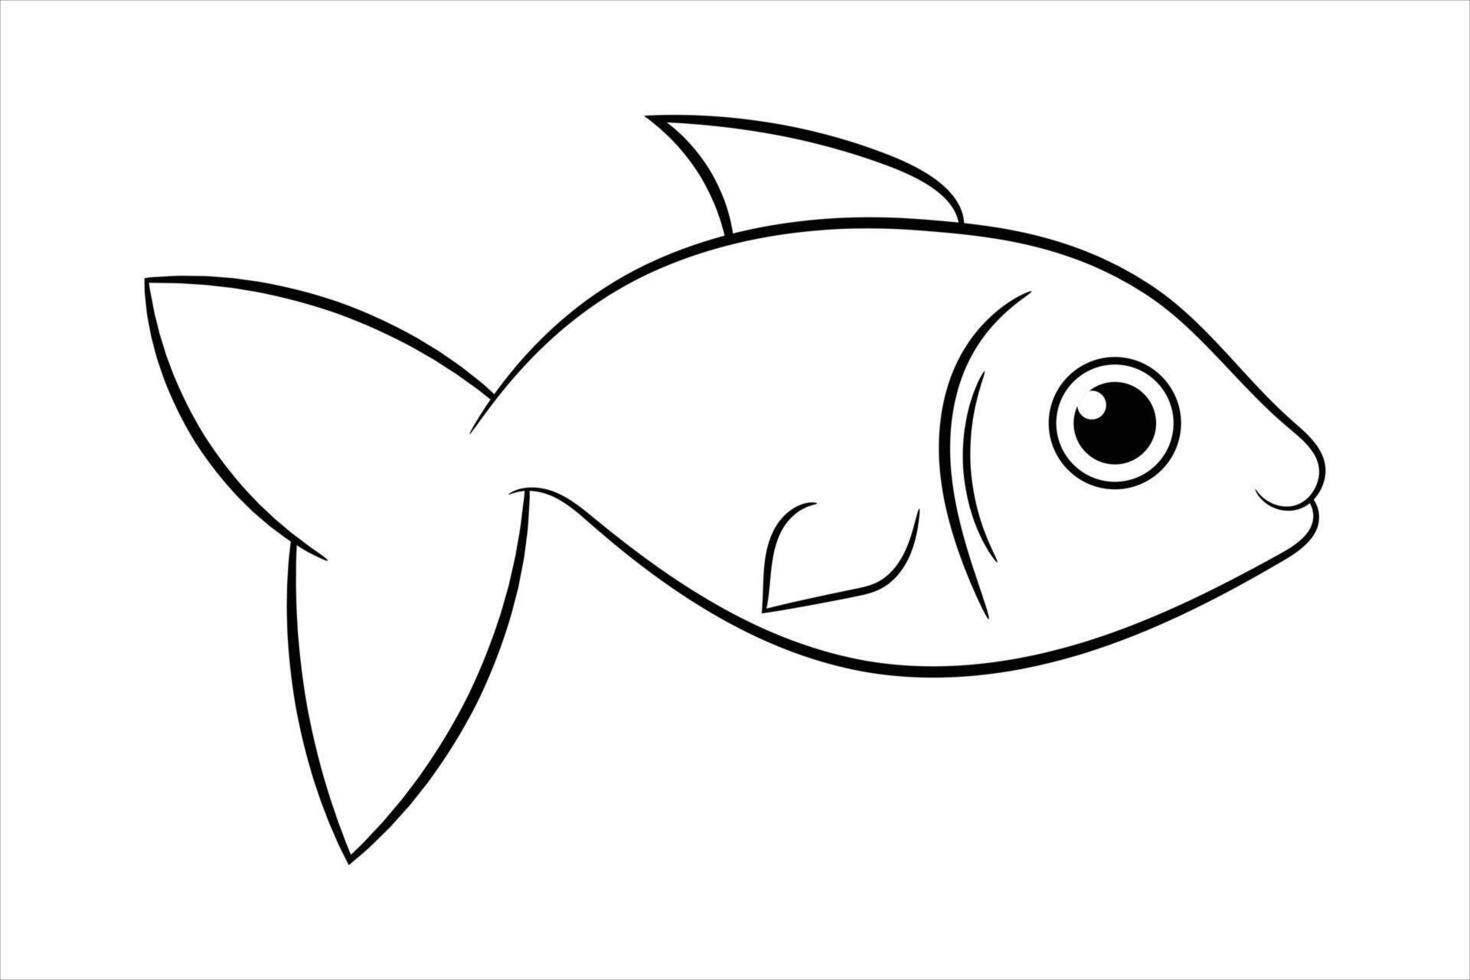 continuous out line art of Beautiful aesthetic sea fish vector art illustration.